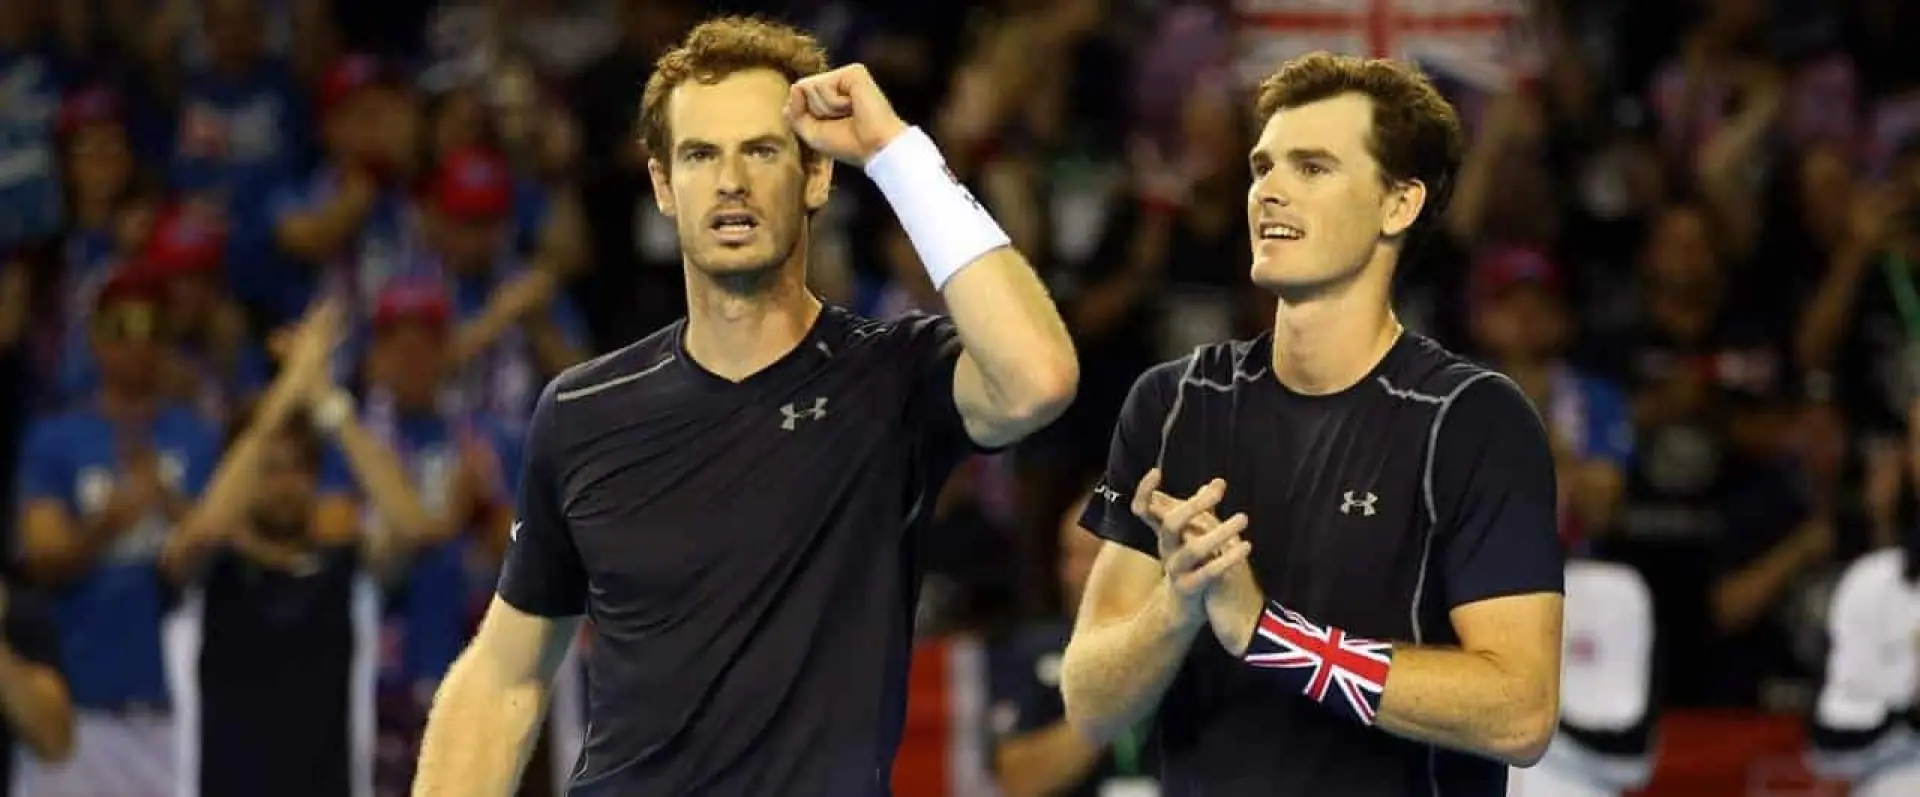 A Murray brothers outright double headlines Coral's 2016 ATP World Tour Finals tips.